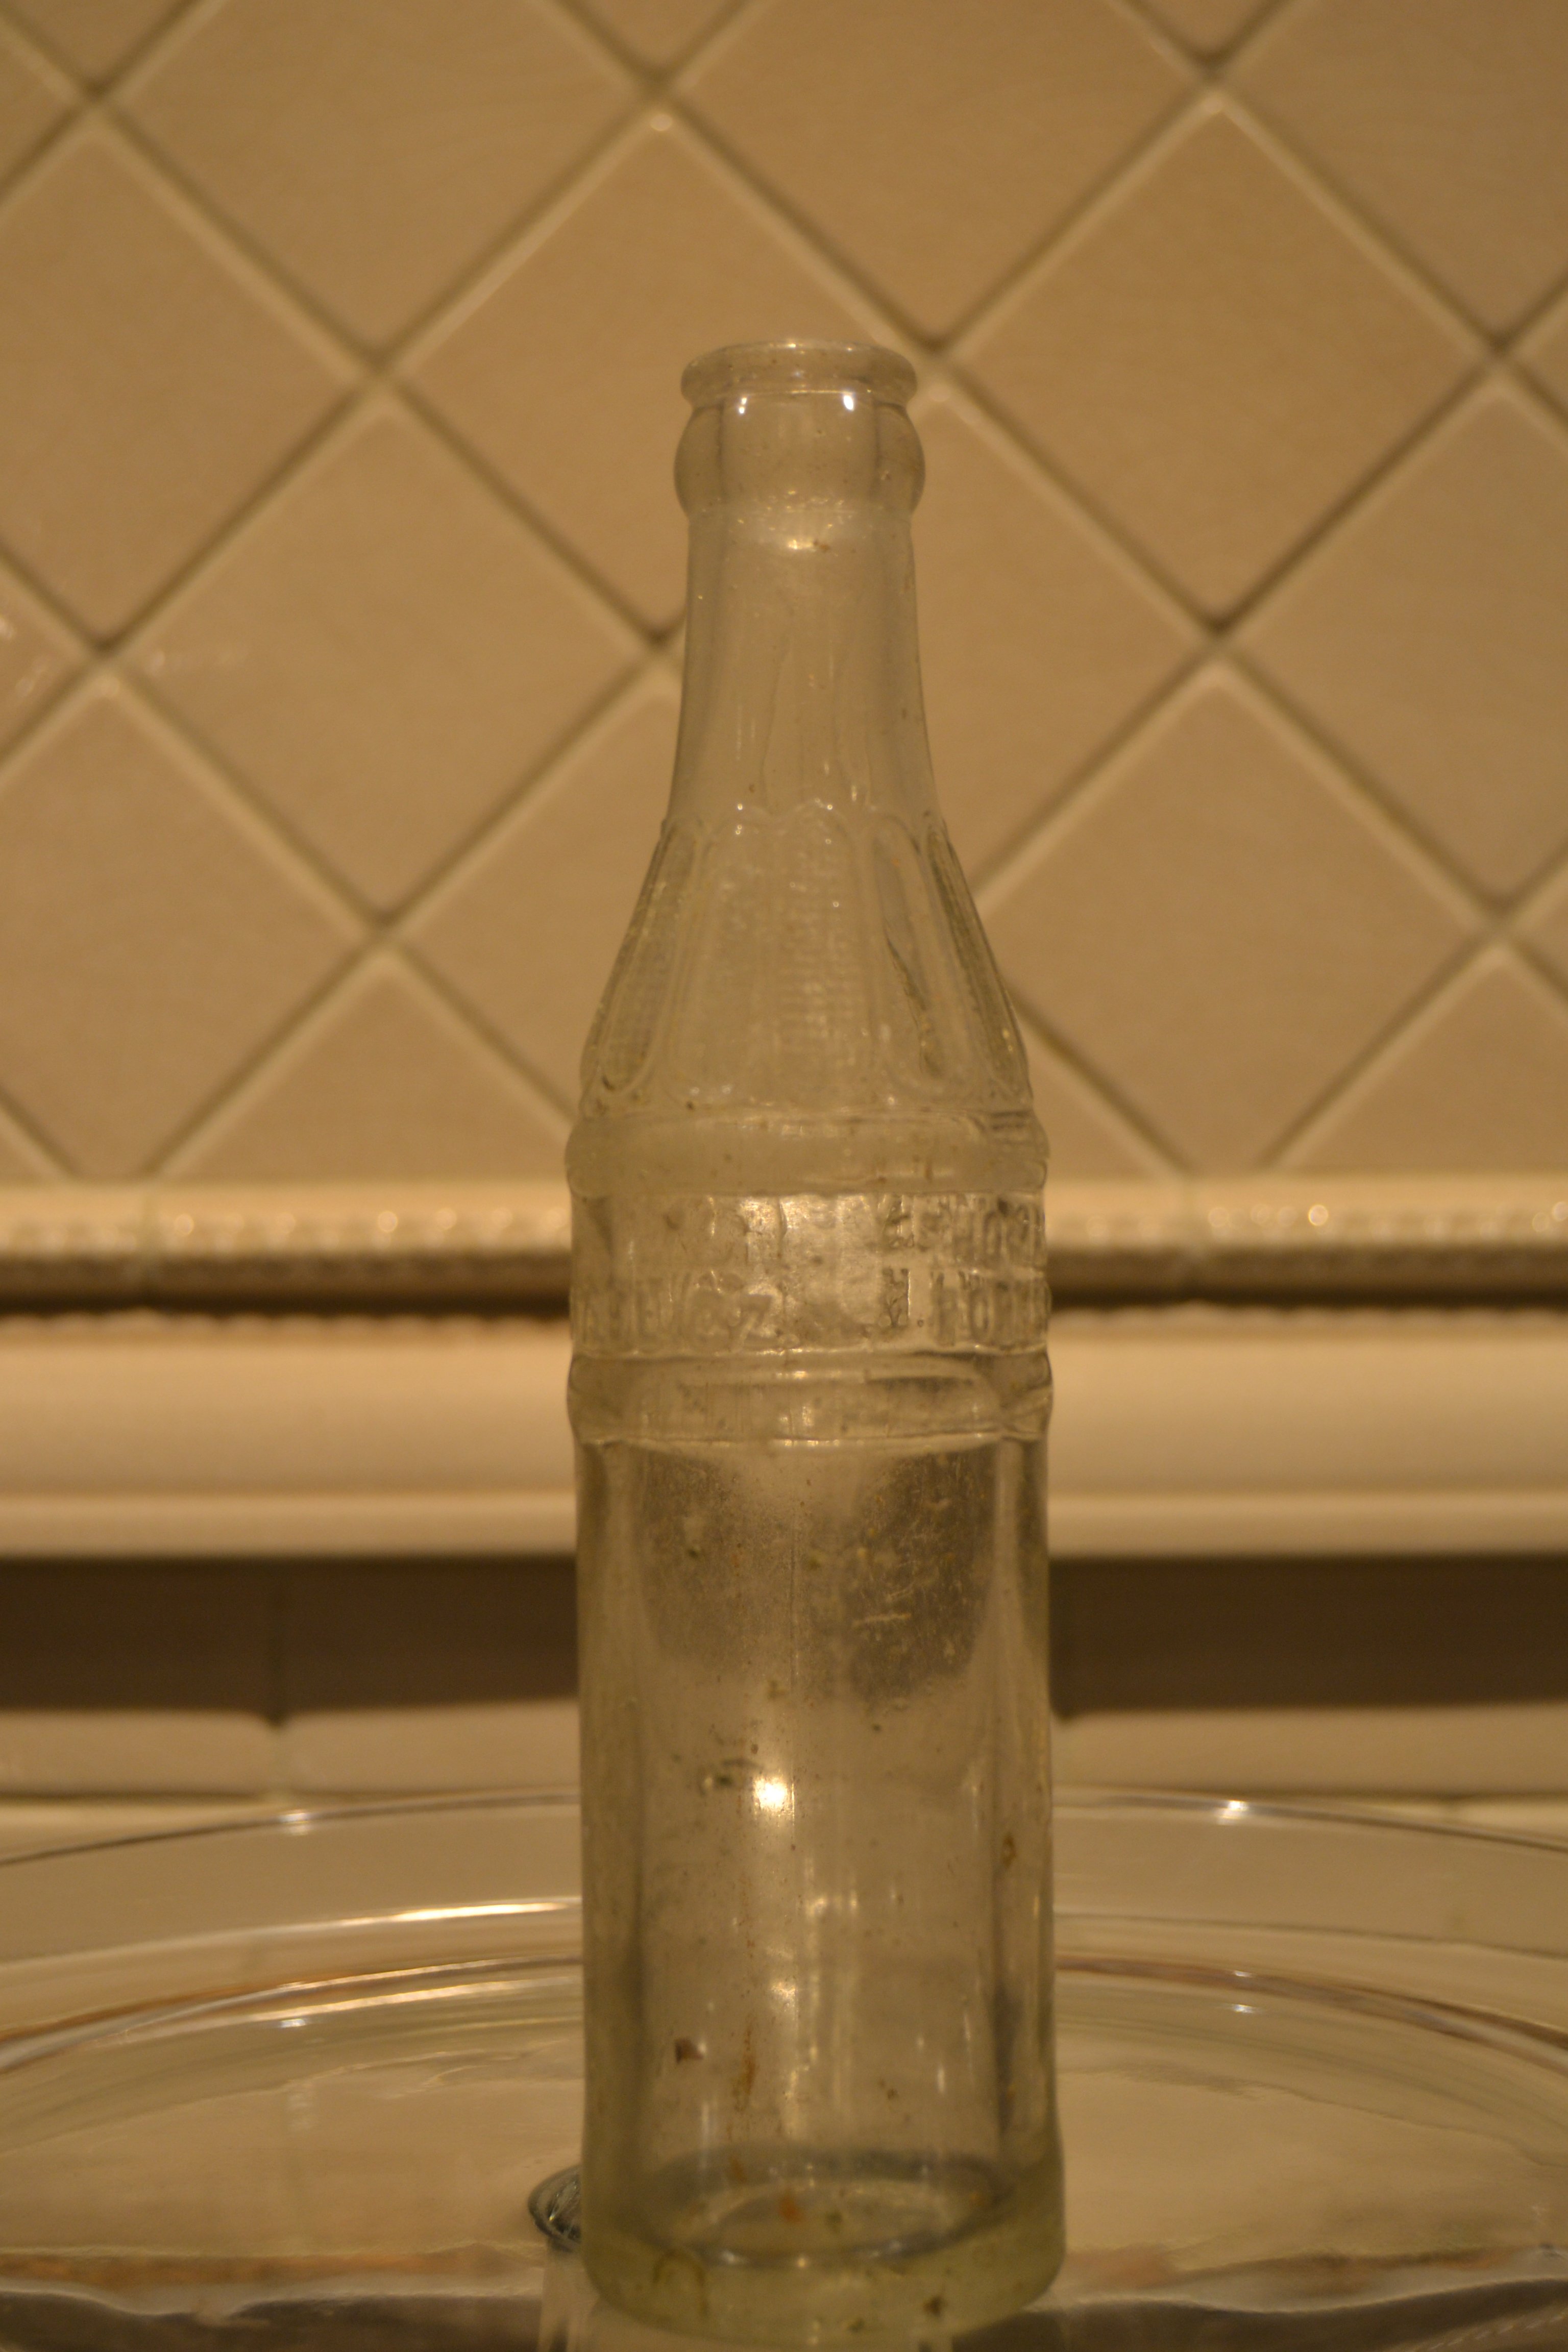 Antique Thomas Loughlin Portsmouth, NH Ale Bottle (C. 1900) For Sale! (+ Shipping & Handling)